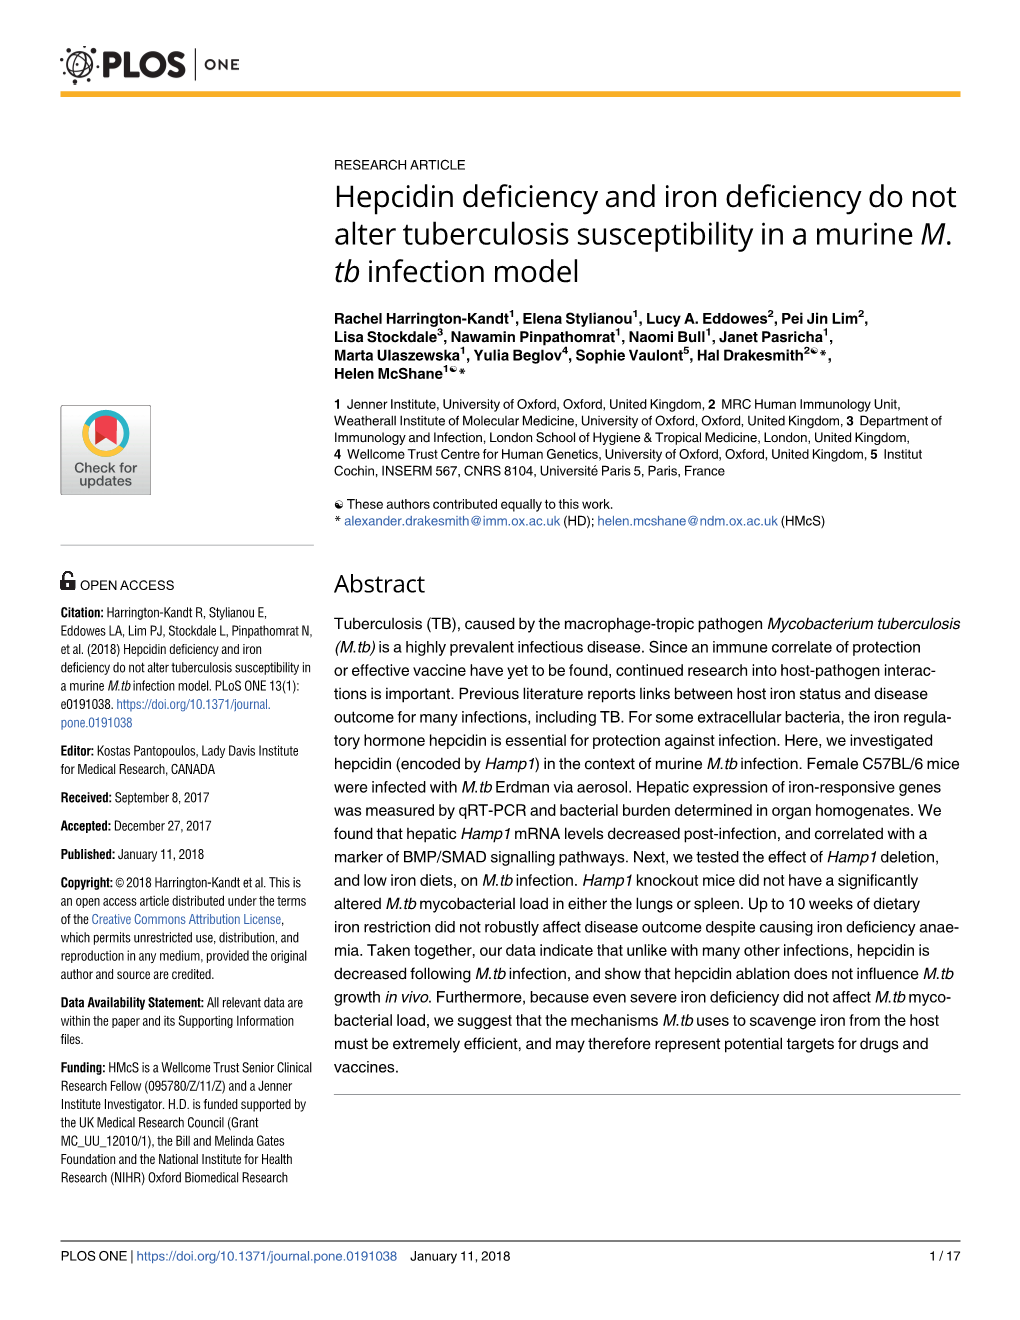 Hepcidin Deficiency and Iron Deficiency Do Not Alter Tuberculosis Susceptibility in a Murine M